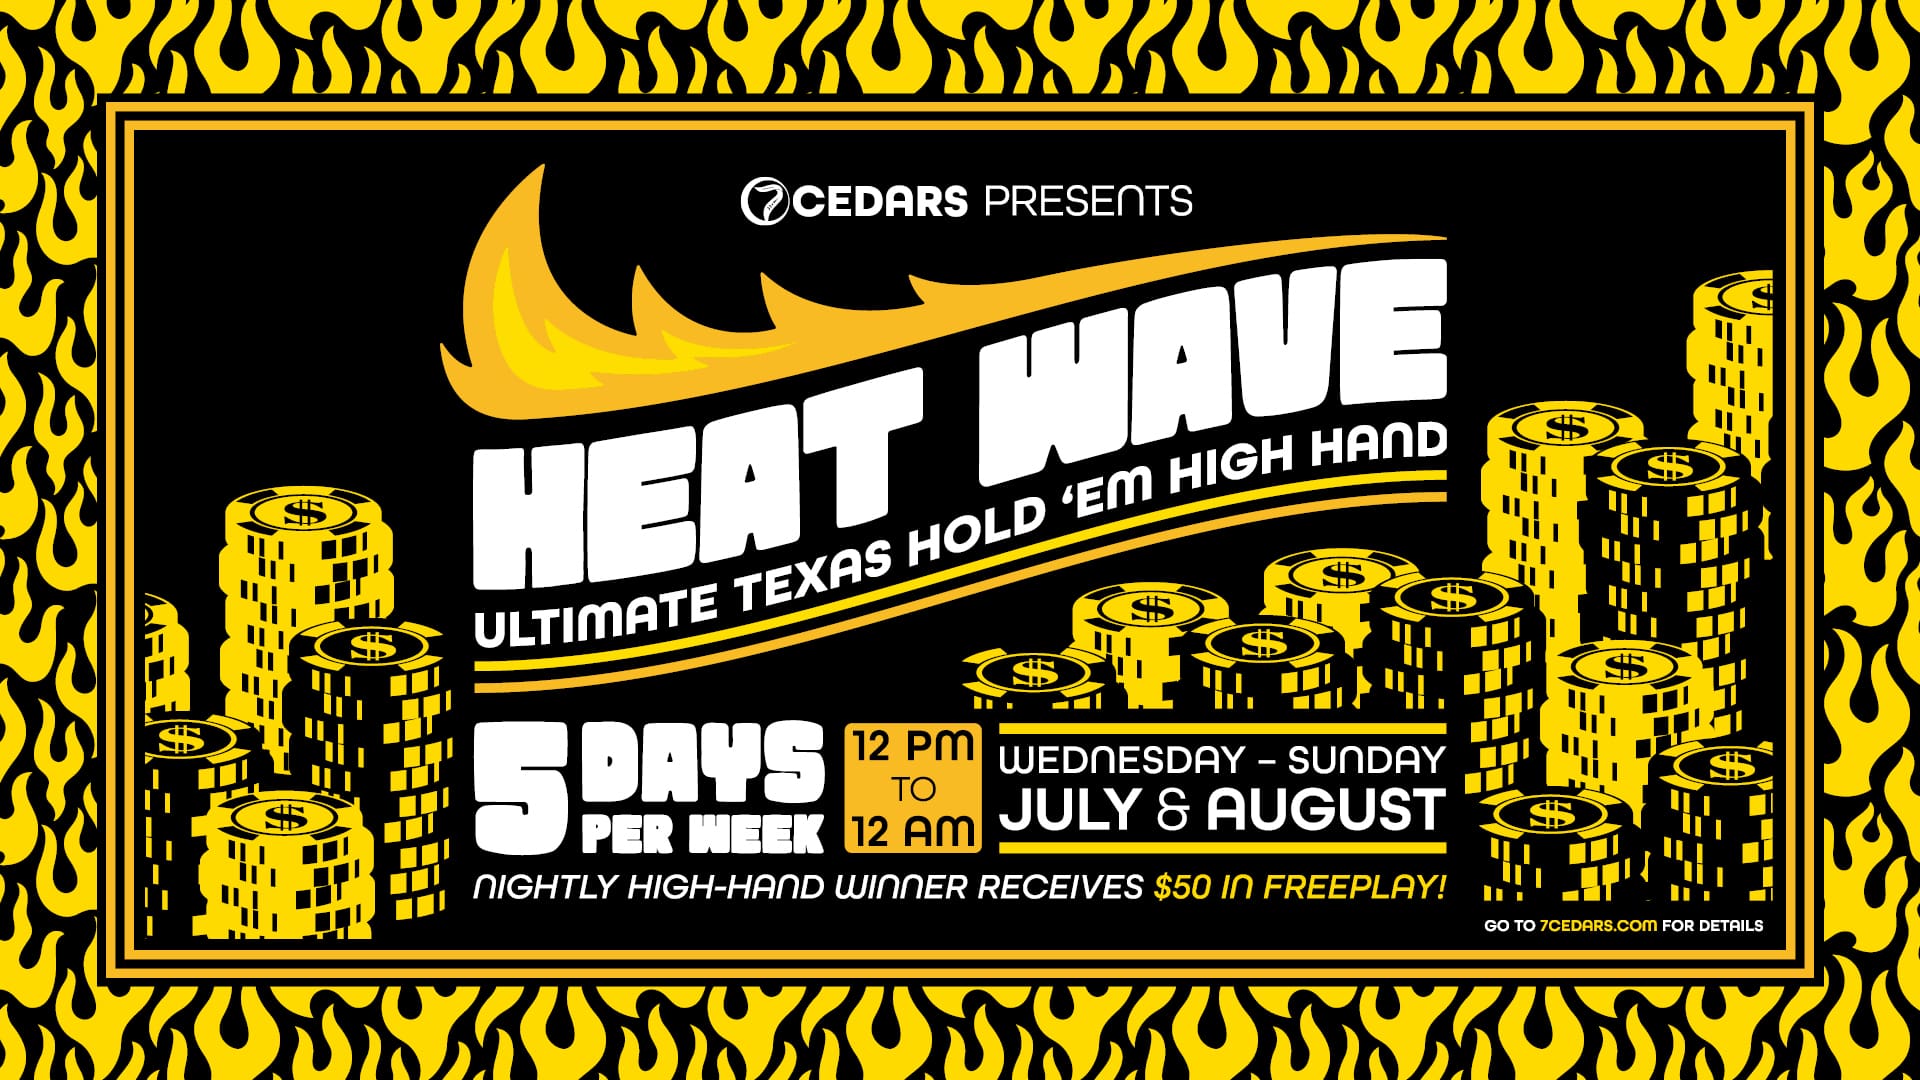 Heat Wave Ultimate Texas Hold 'Em High Hand